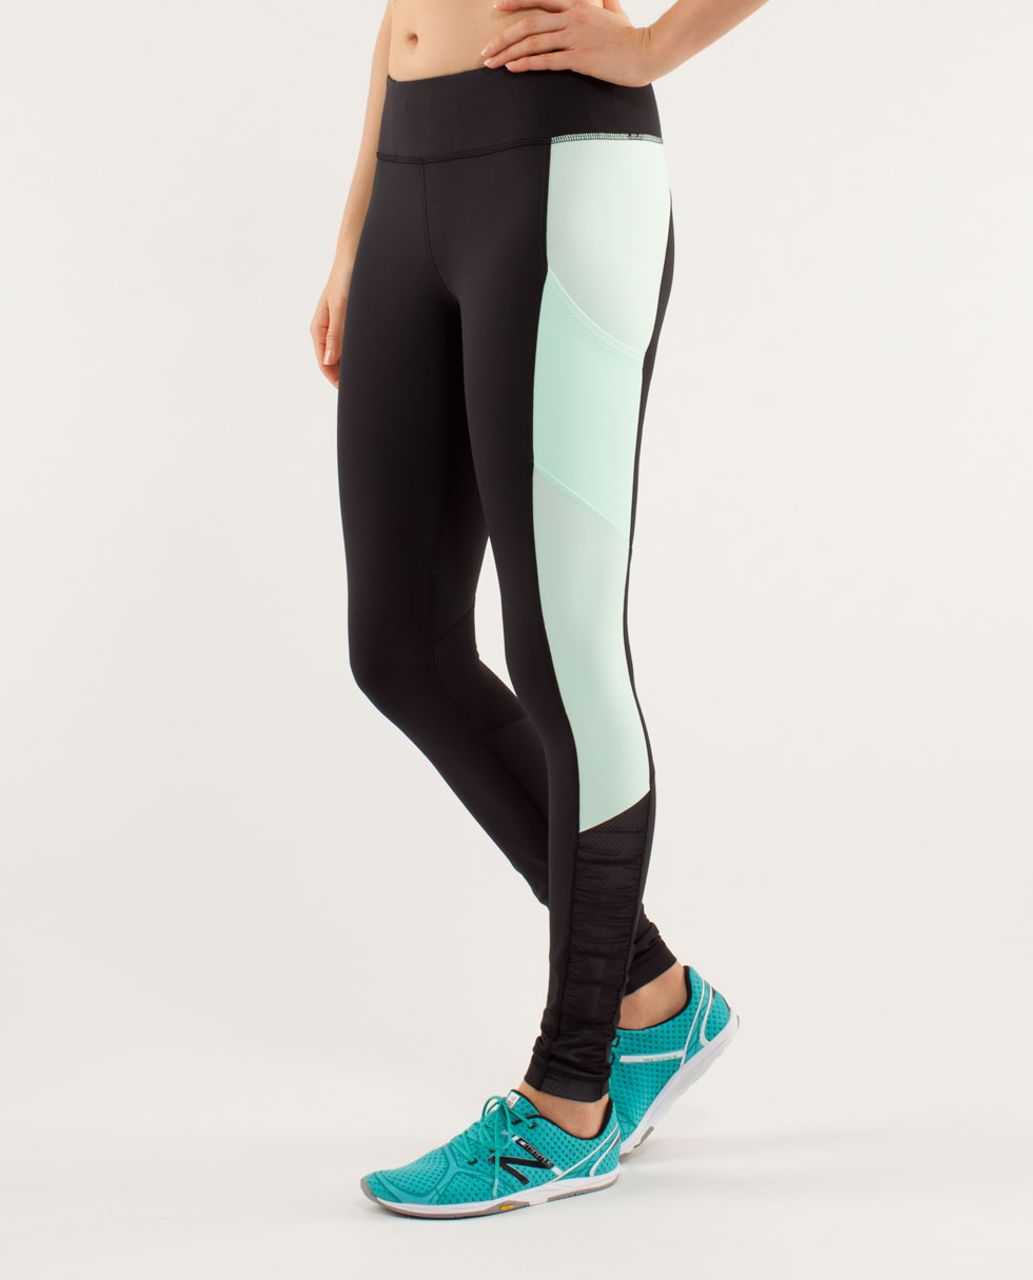 Lululemon Run:  Get Up And Glow Tight - Black / Mint Moment